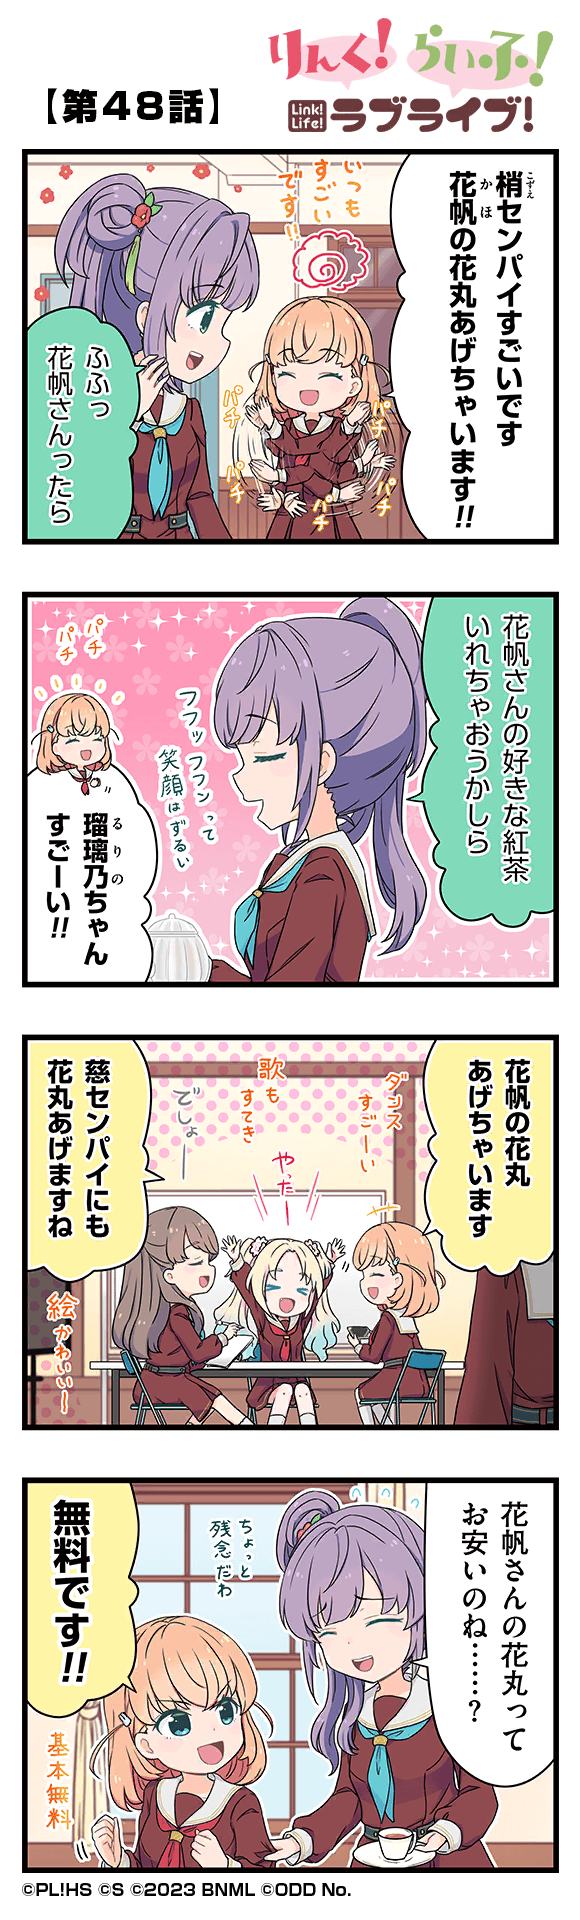 Link! Life! Love Live!「Chapter 48」